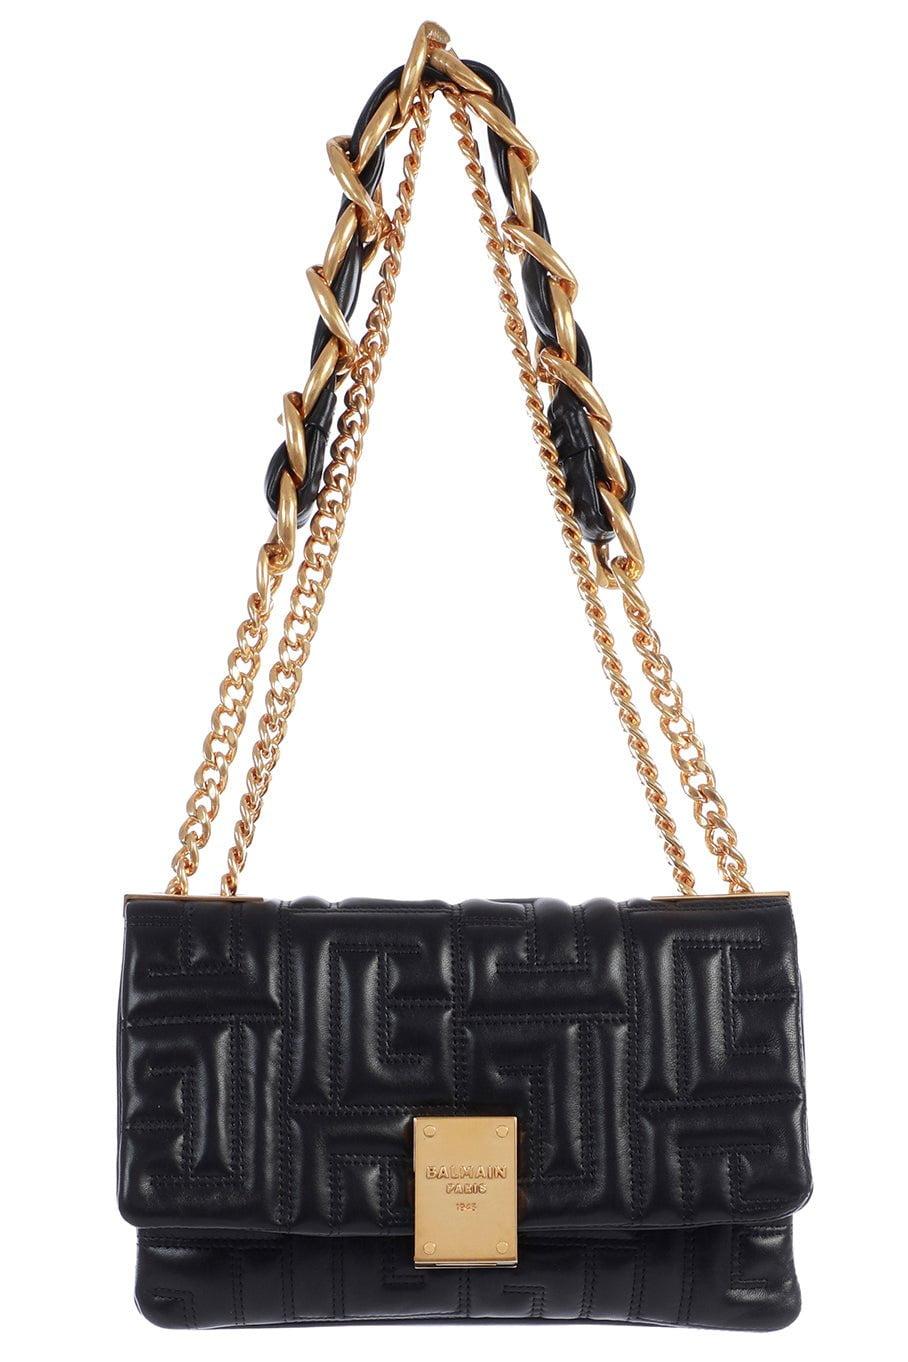 Balmain 1945 Small Quilted Soft Bag in Black | Lyst